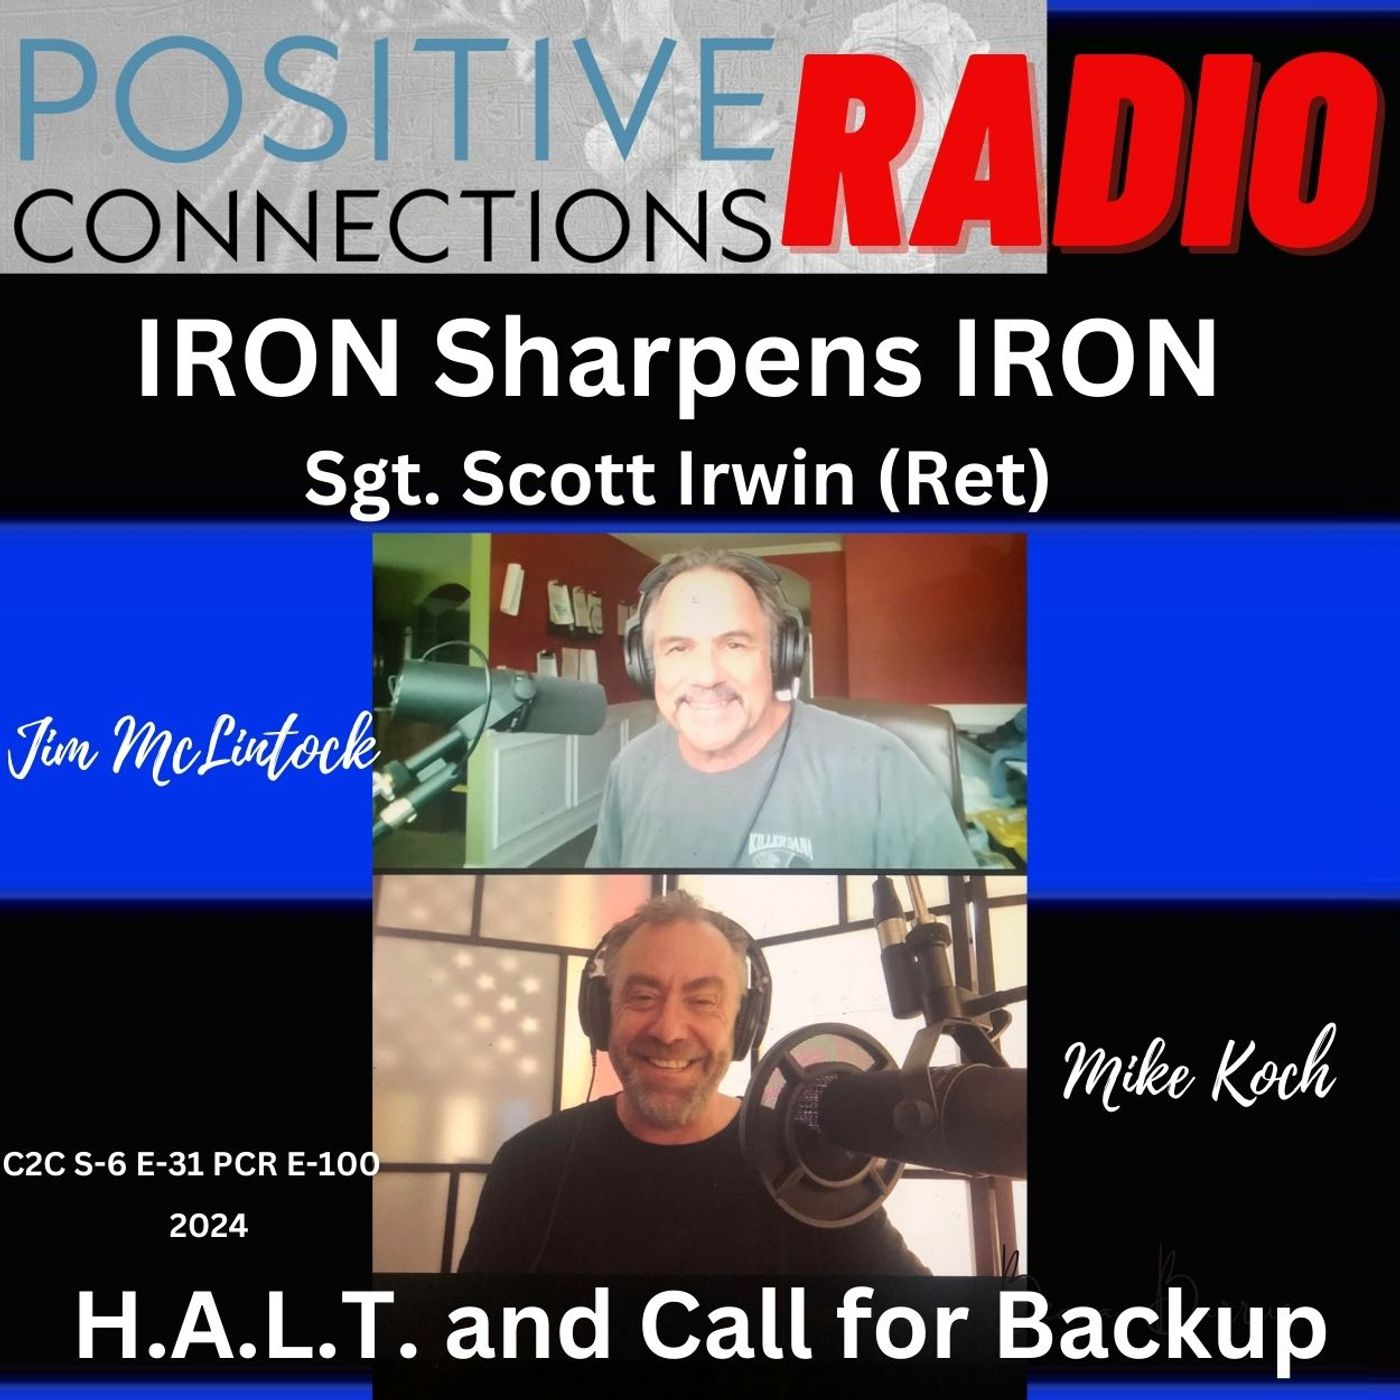 IRON Sharpens IRON: Sgt. Scott Irwin: Brothers and Sisters of Courage